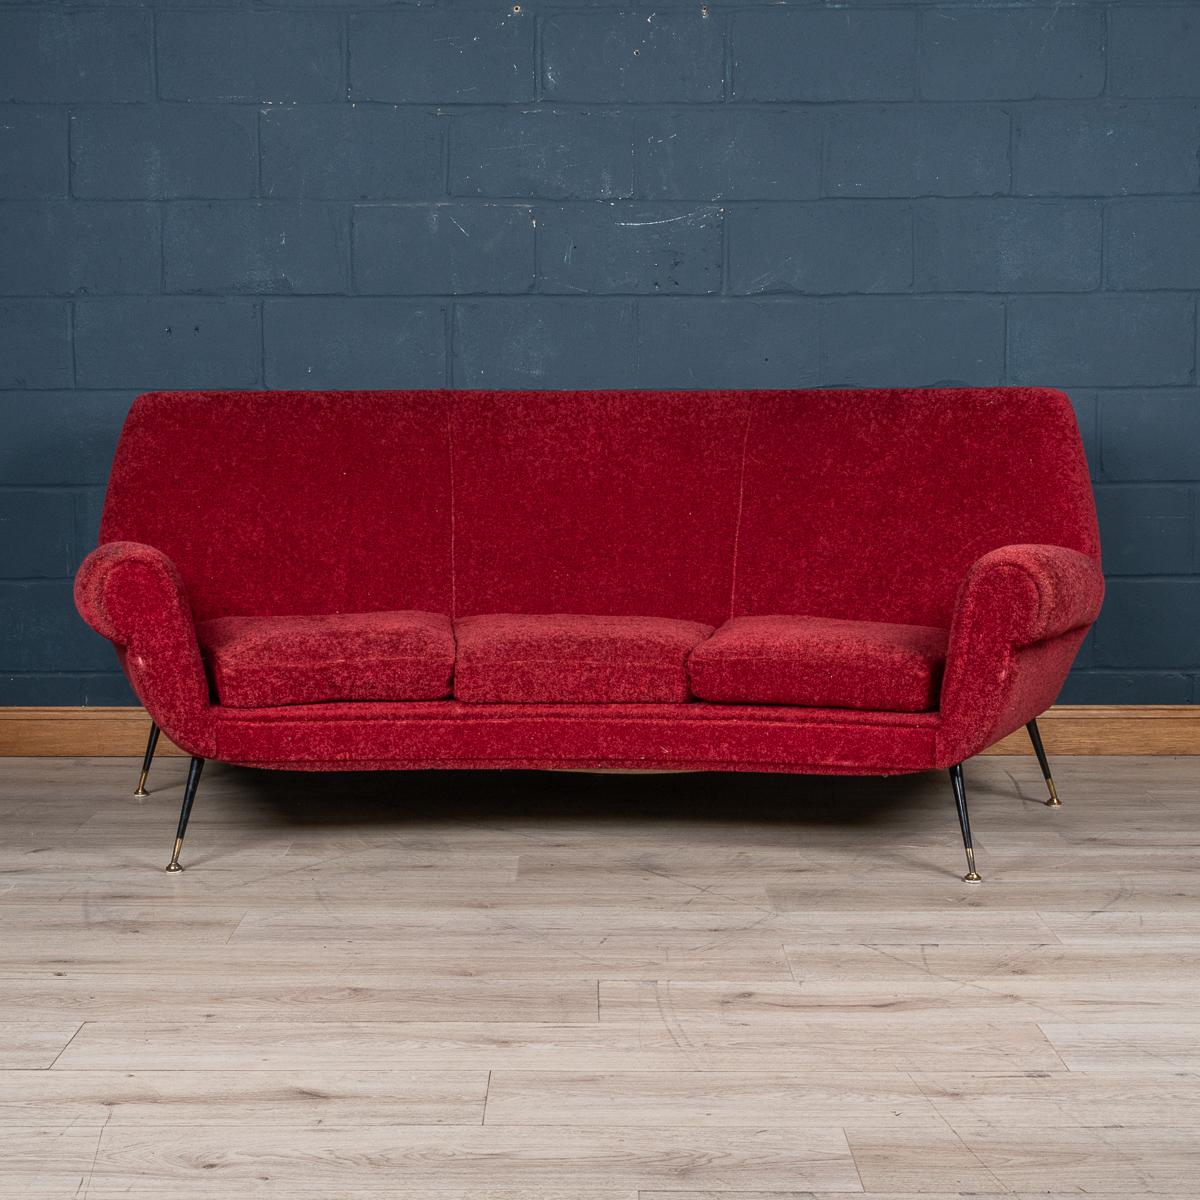 A curved sofa made in Italy in the middle part of the 20th century. The sofa has been upholstered in a sumptuous crimson boucle’ fabric, the striking mid century design with sharp angles, tapered legs finished with brass tips fits so well in any